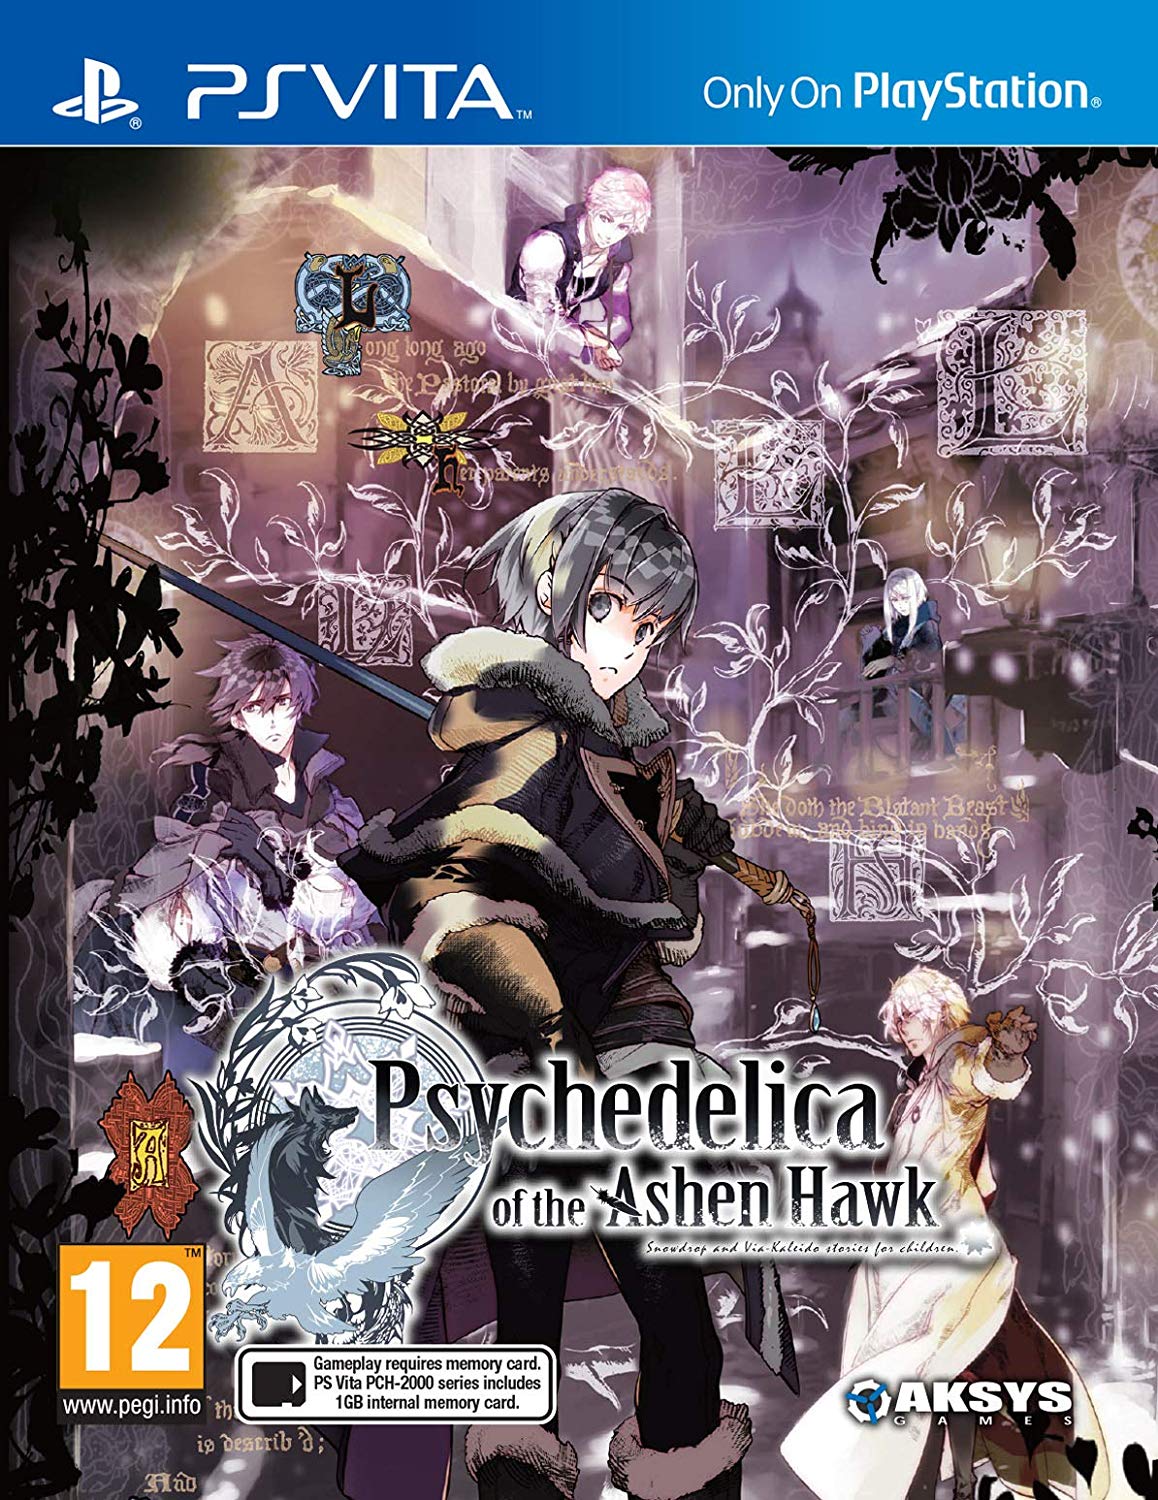 Psychedelica of the Ashen Hawk PS Vita otome game